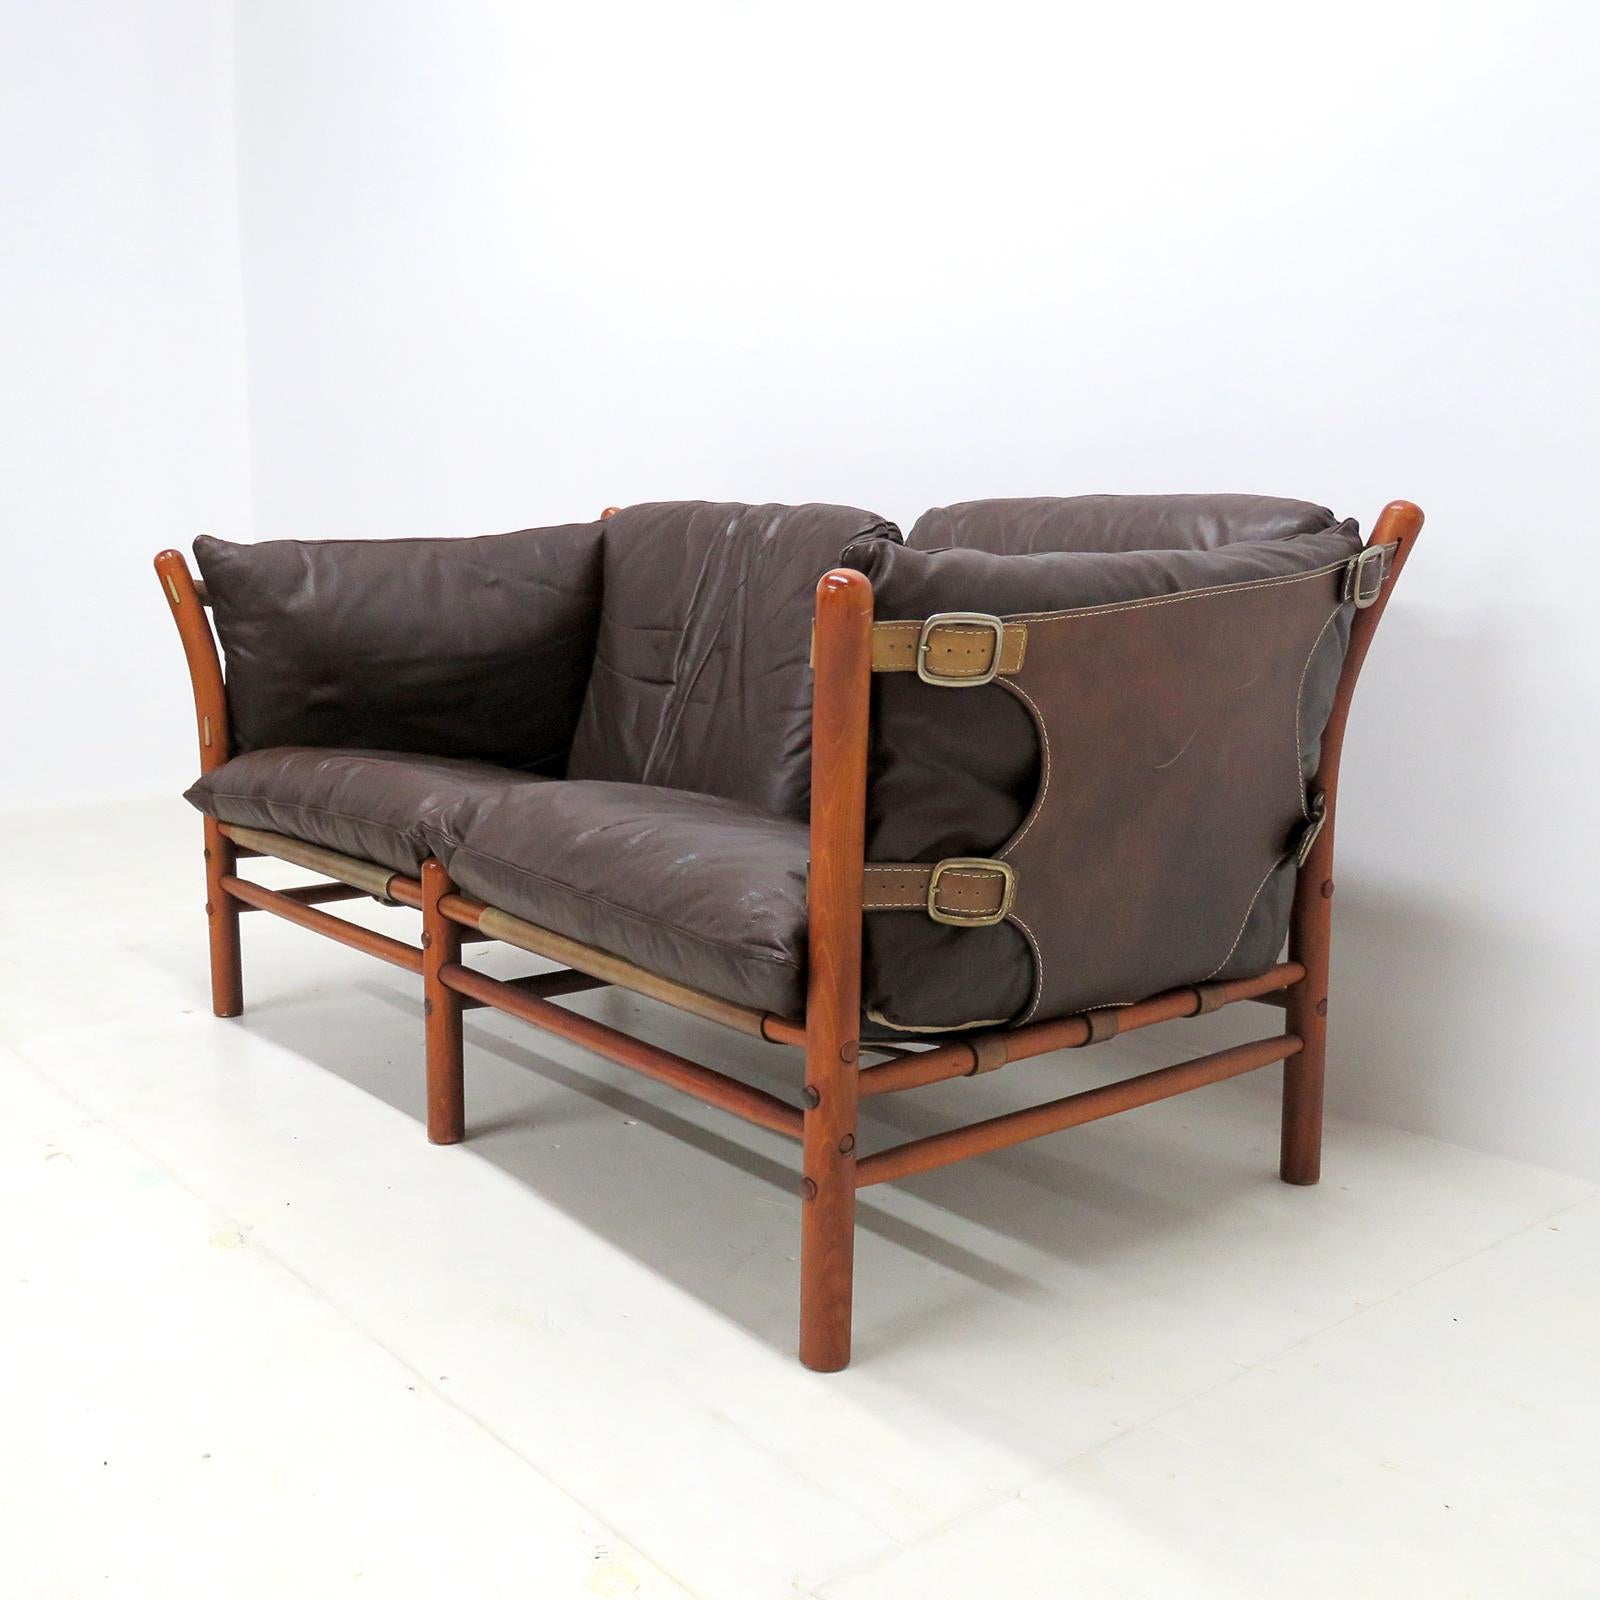 Stained Leather Settee Model ‘Ilona’ by Arne Norell, 1960 For Sale